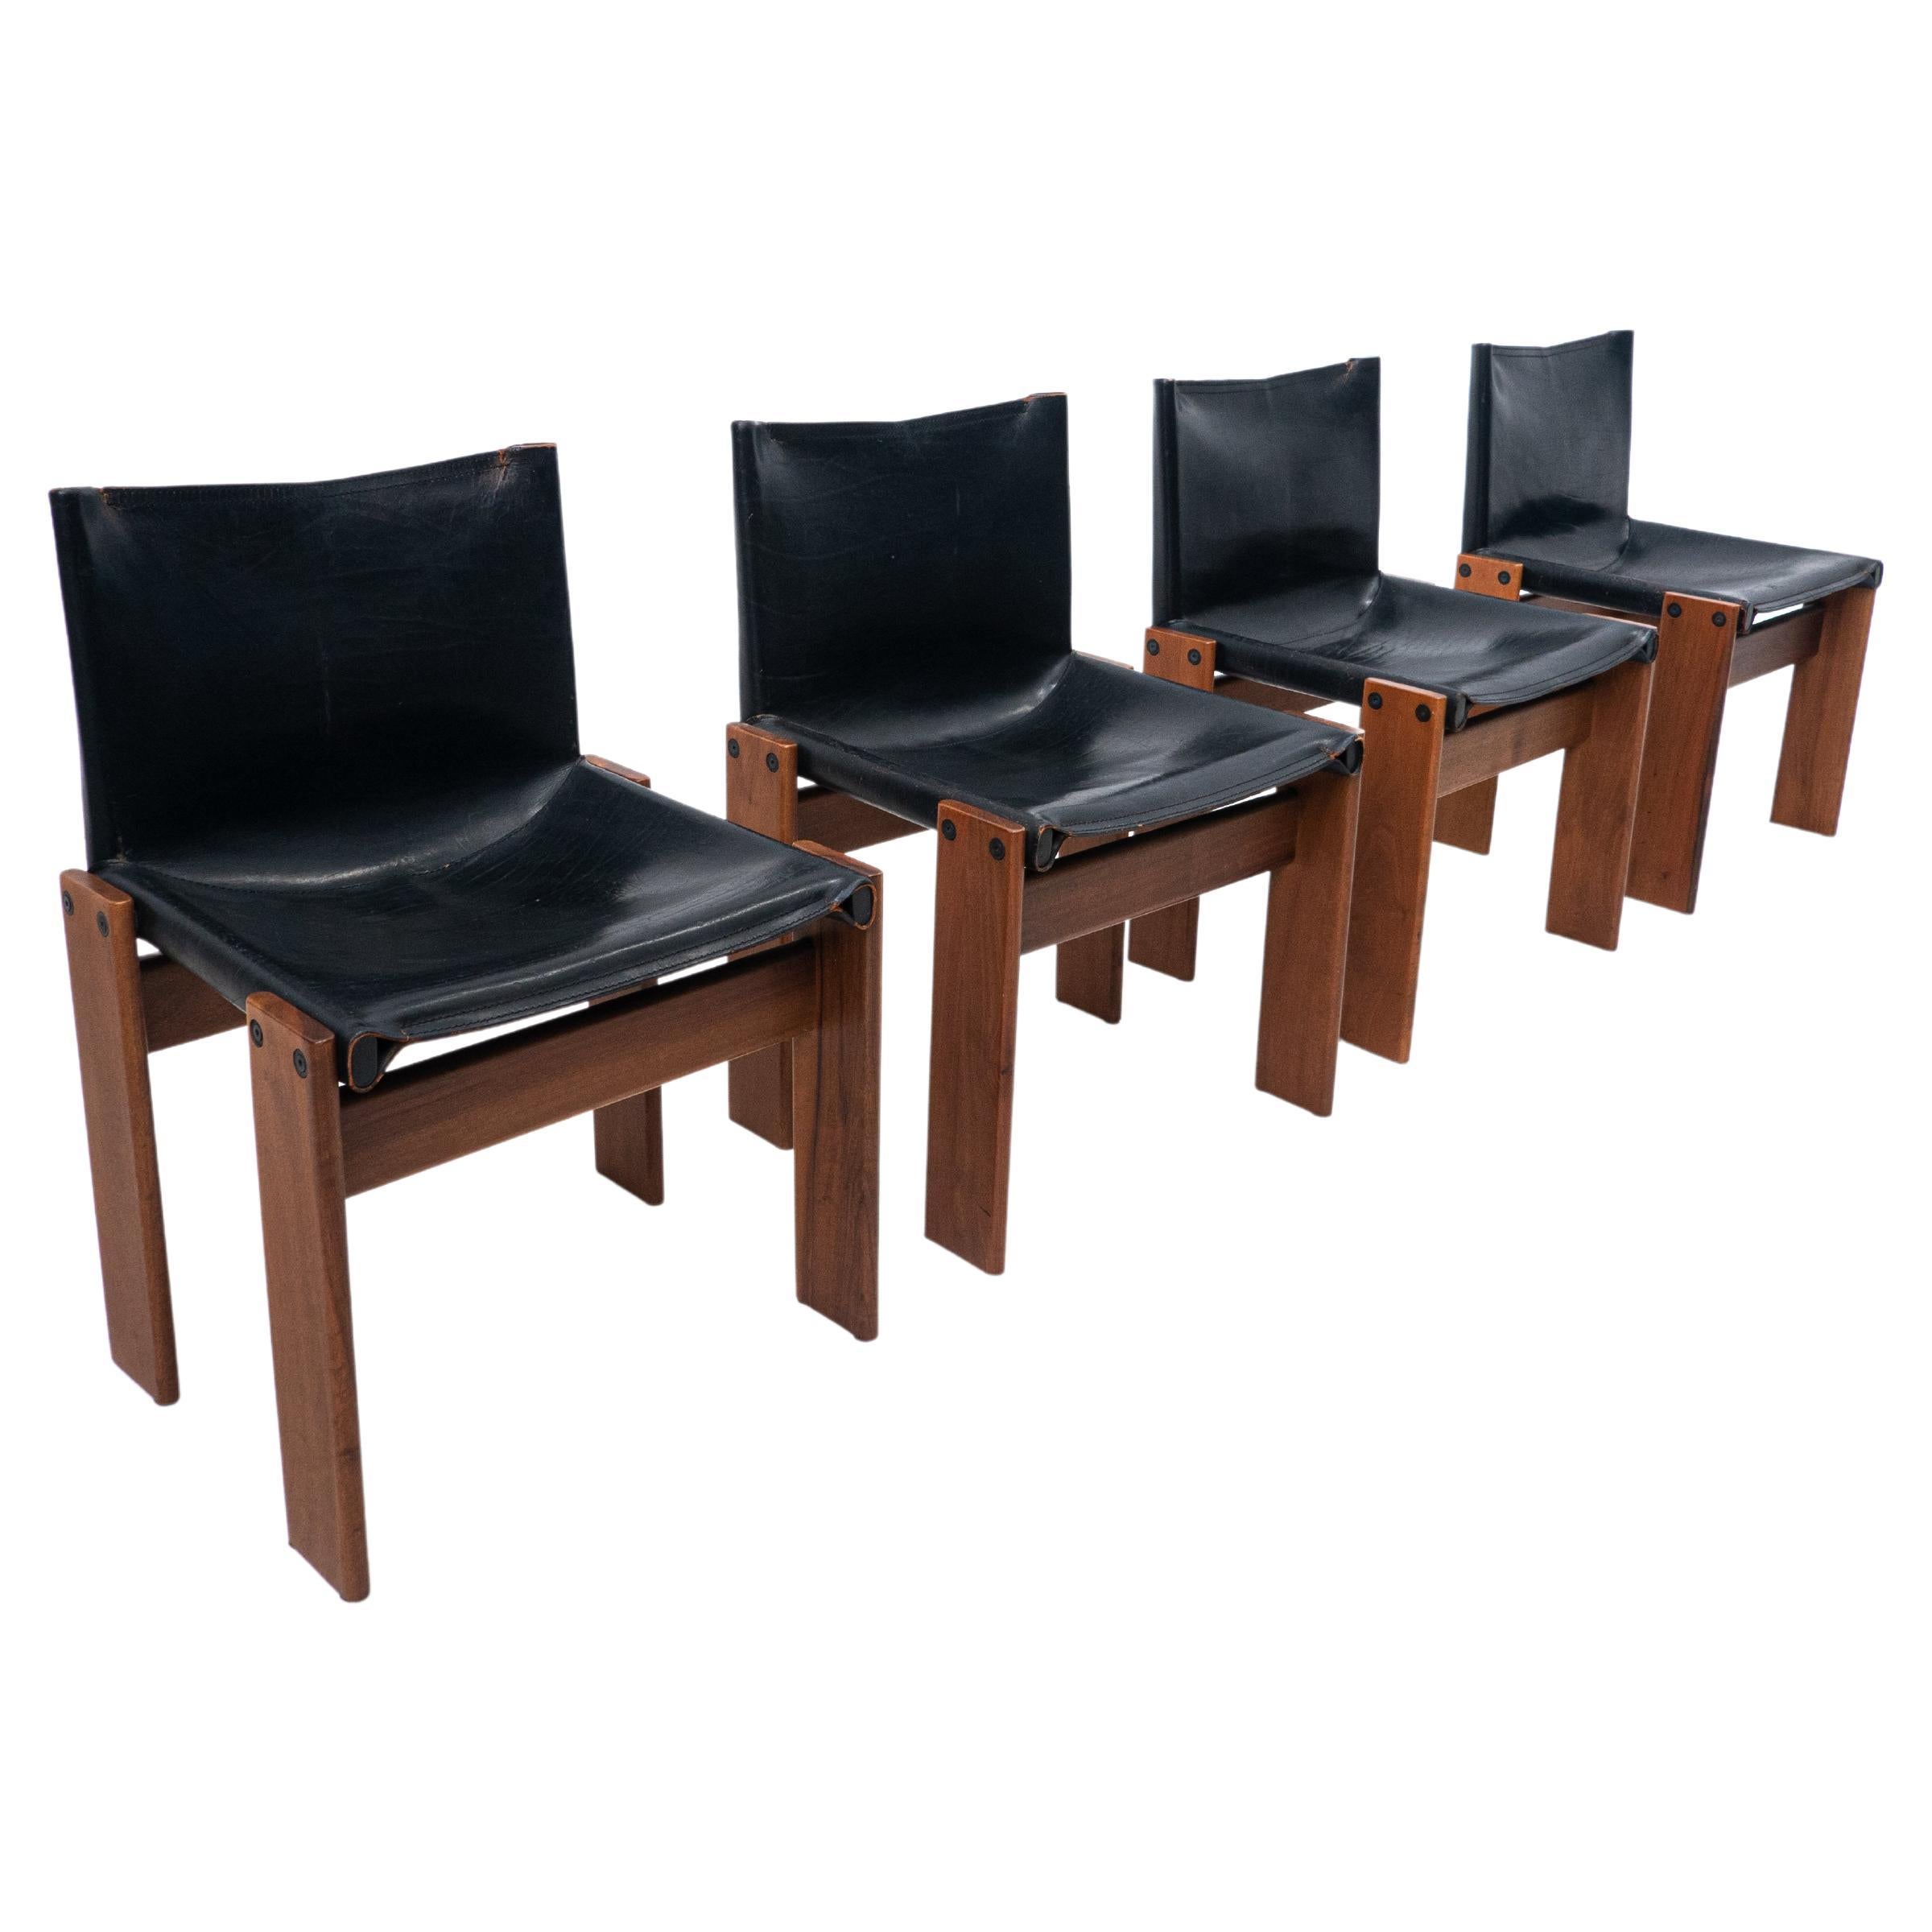 Set of 4 Black Leather Chairs Model "Monk" by Afra and Tobia Scarpa for Molteni For Sale